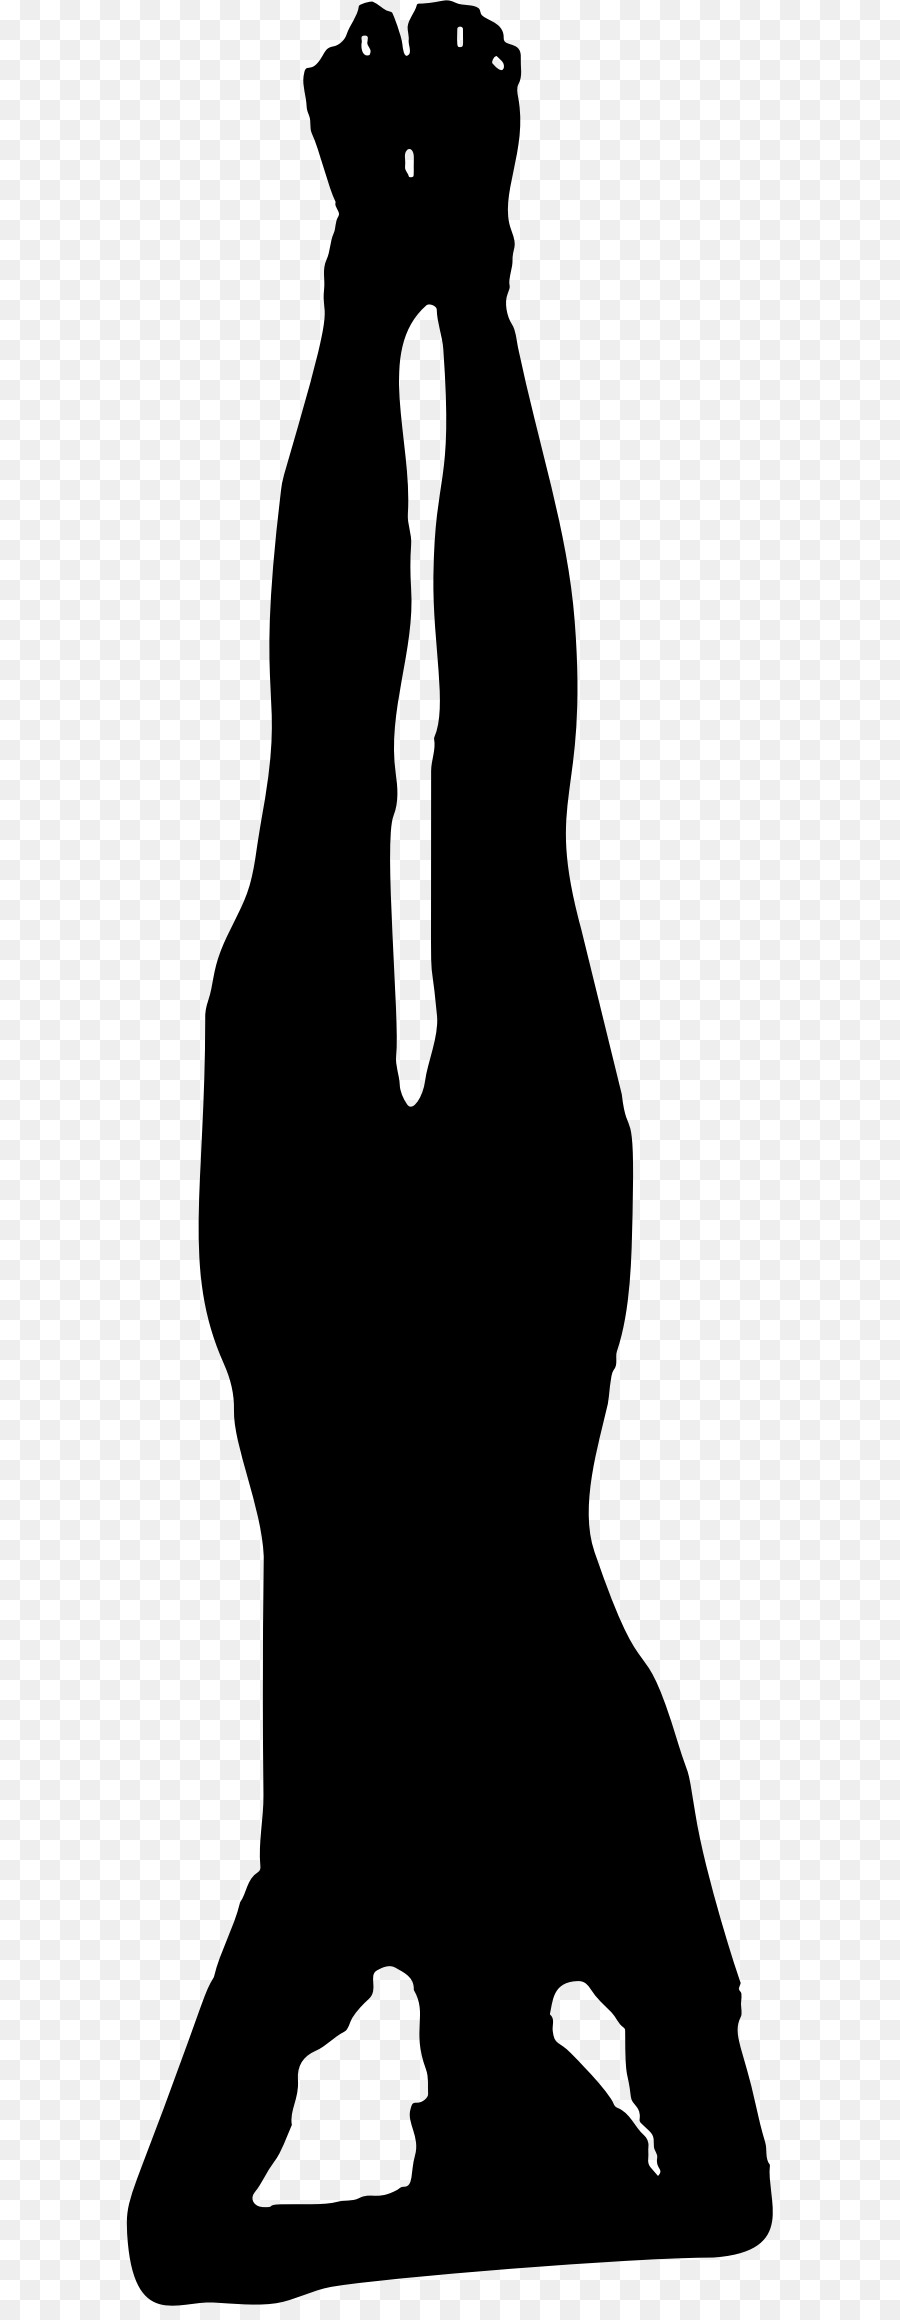 Silhouette Photography Female - Yoga png download - 647*2306 - Free Transparent Silhouette png Download.